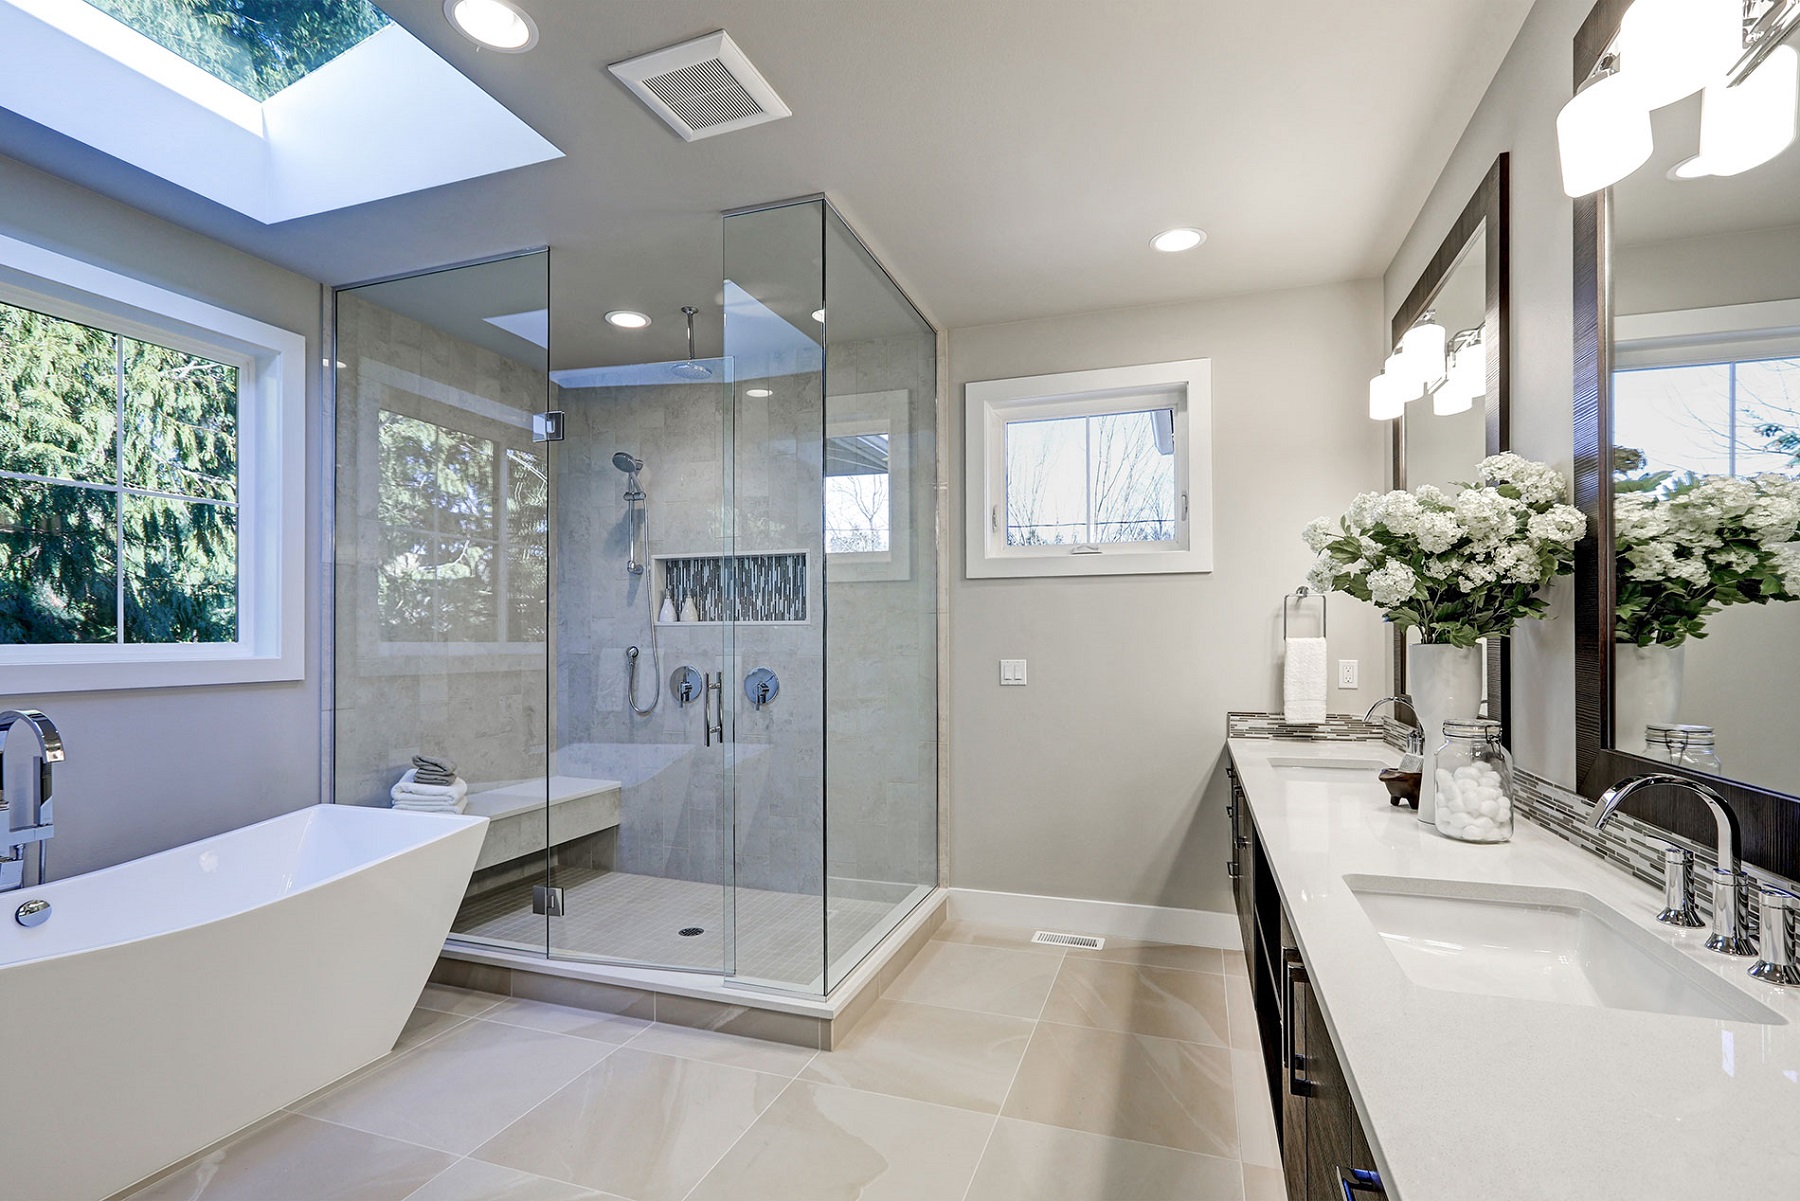 How Much Does A Shower Remodel Cost, How Much Does It Cost To Remodel A Full Bathroom